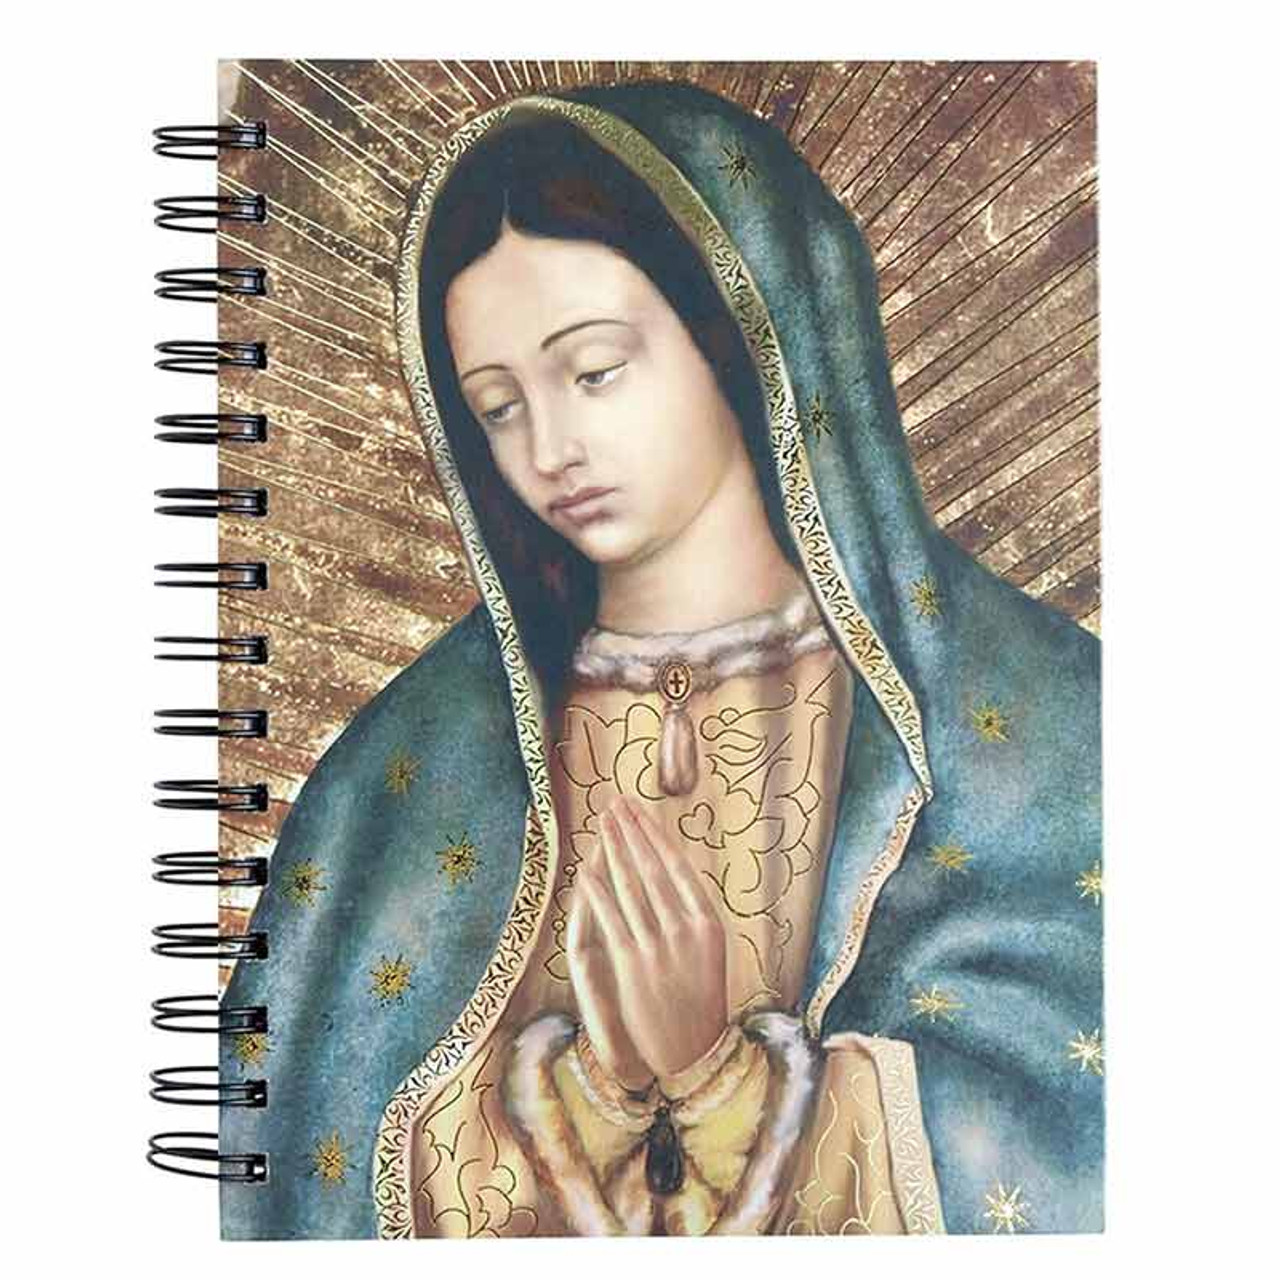 6 St. Benedict Wall Medal - Our Lady of Guadalupe Monastery Giftshop